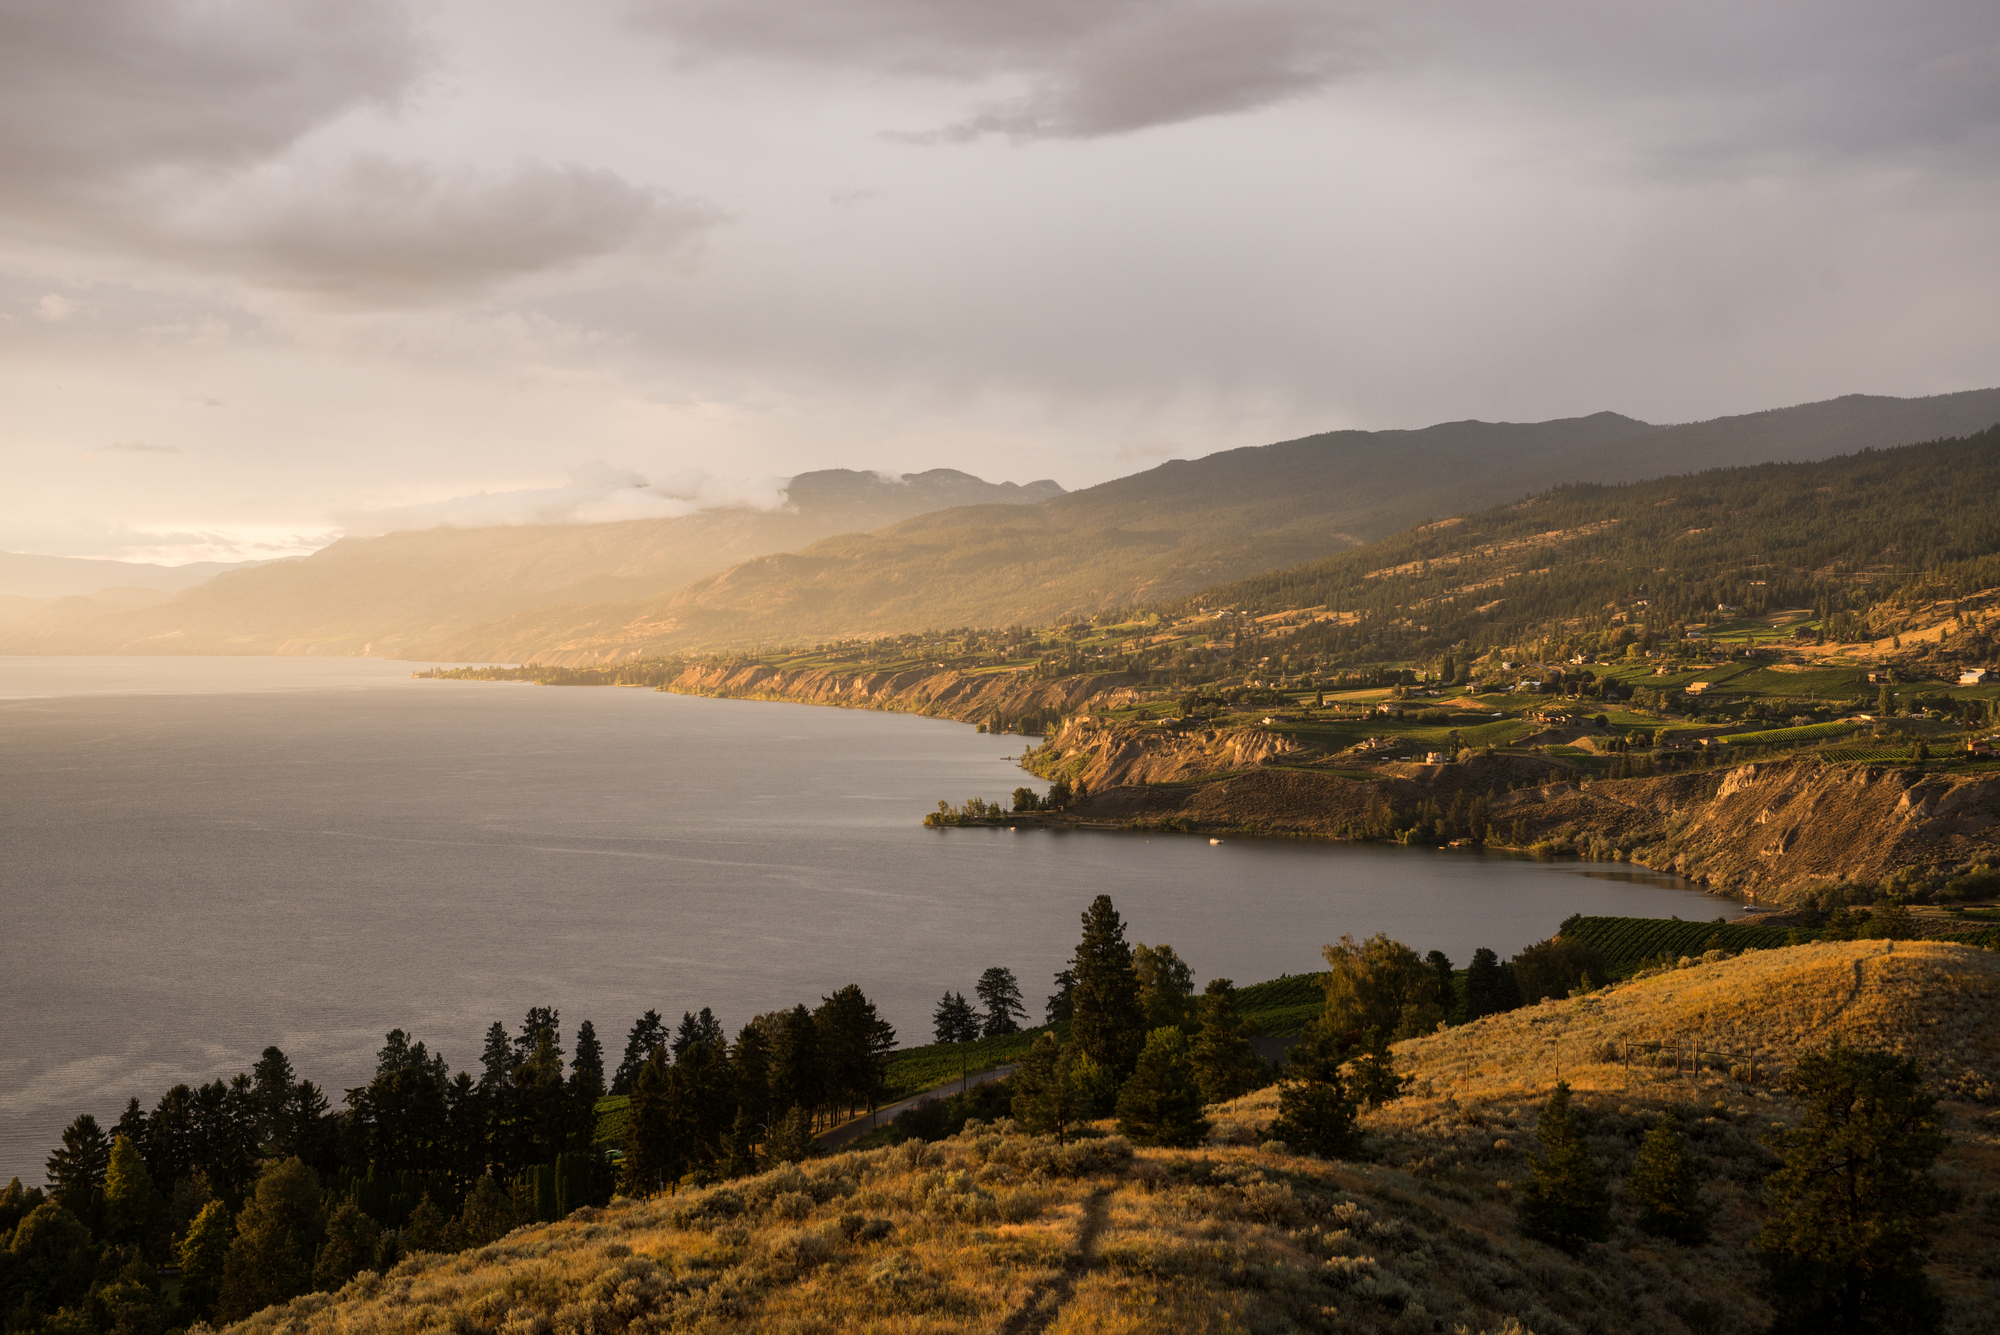 Sunset over Okanagan Lake and Naramata from Munson Mountain. The hills are gently sloped down towards the lake with vineyards and farmlands.